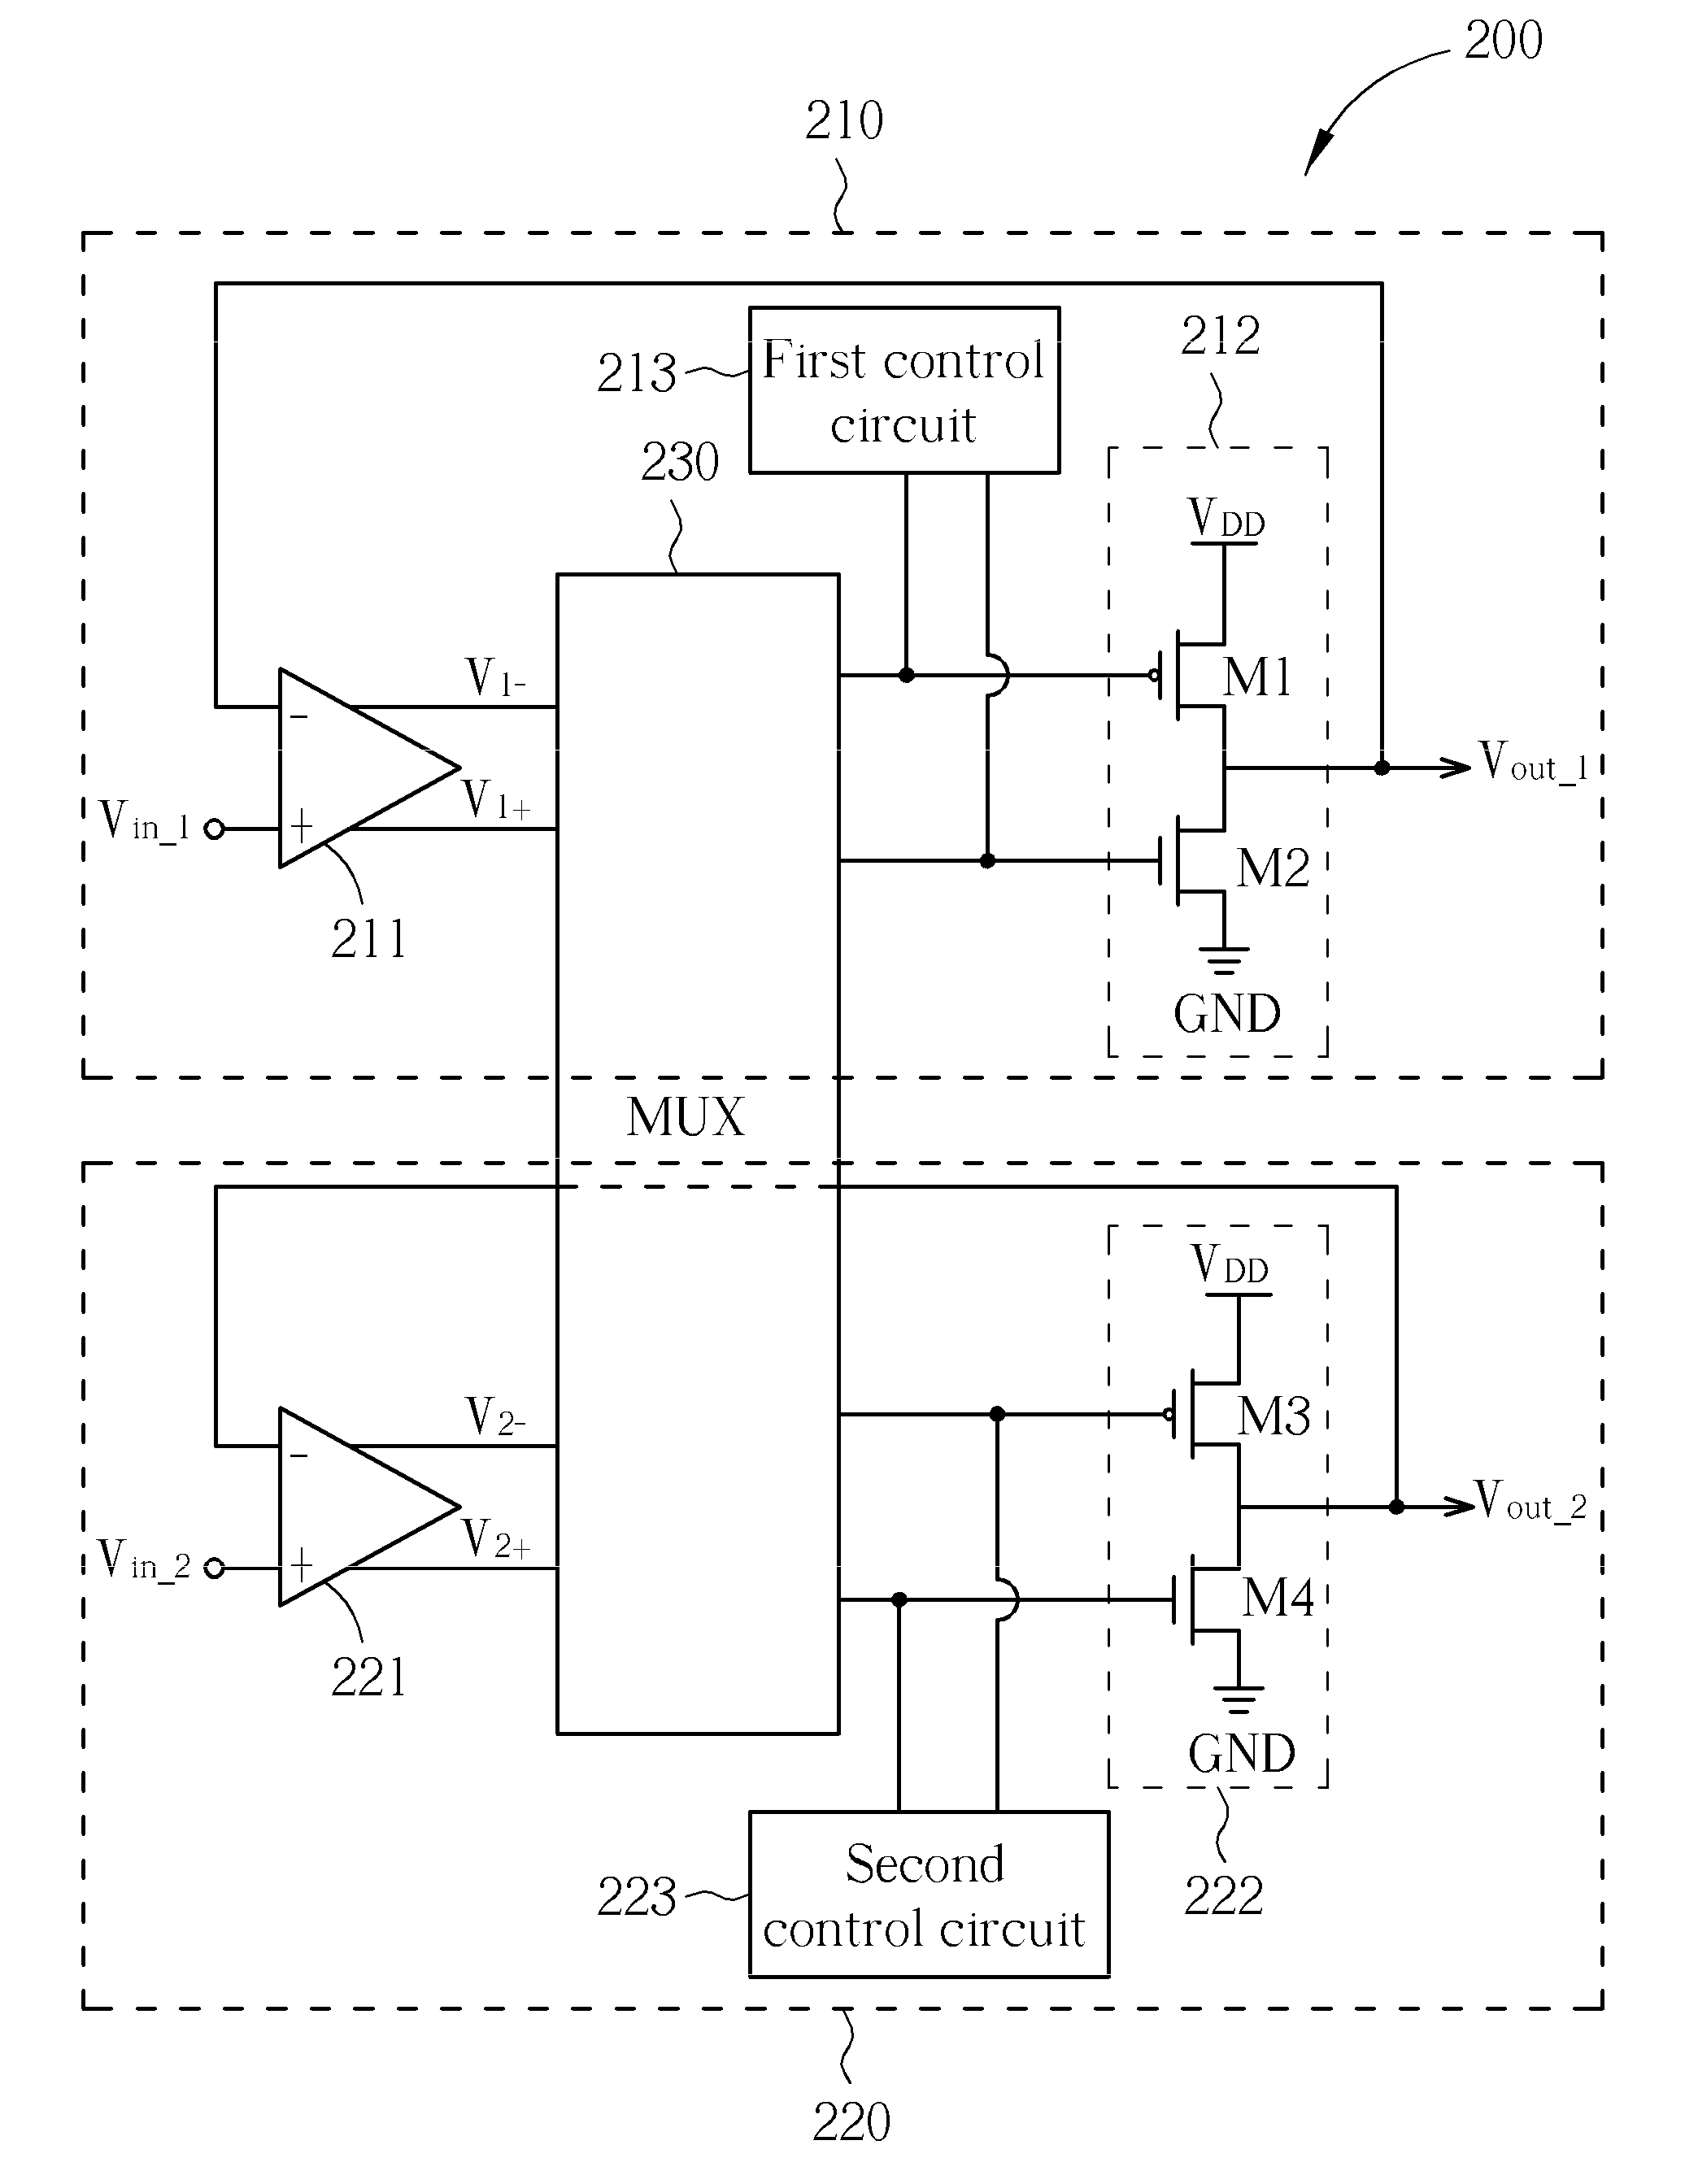 Source driver and associated driving method